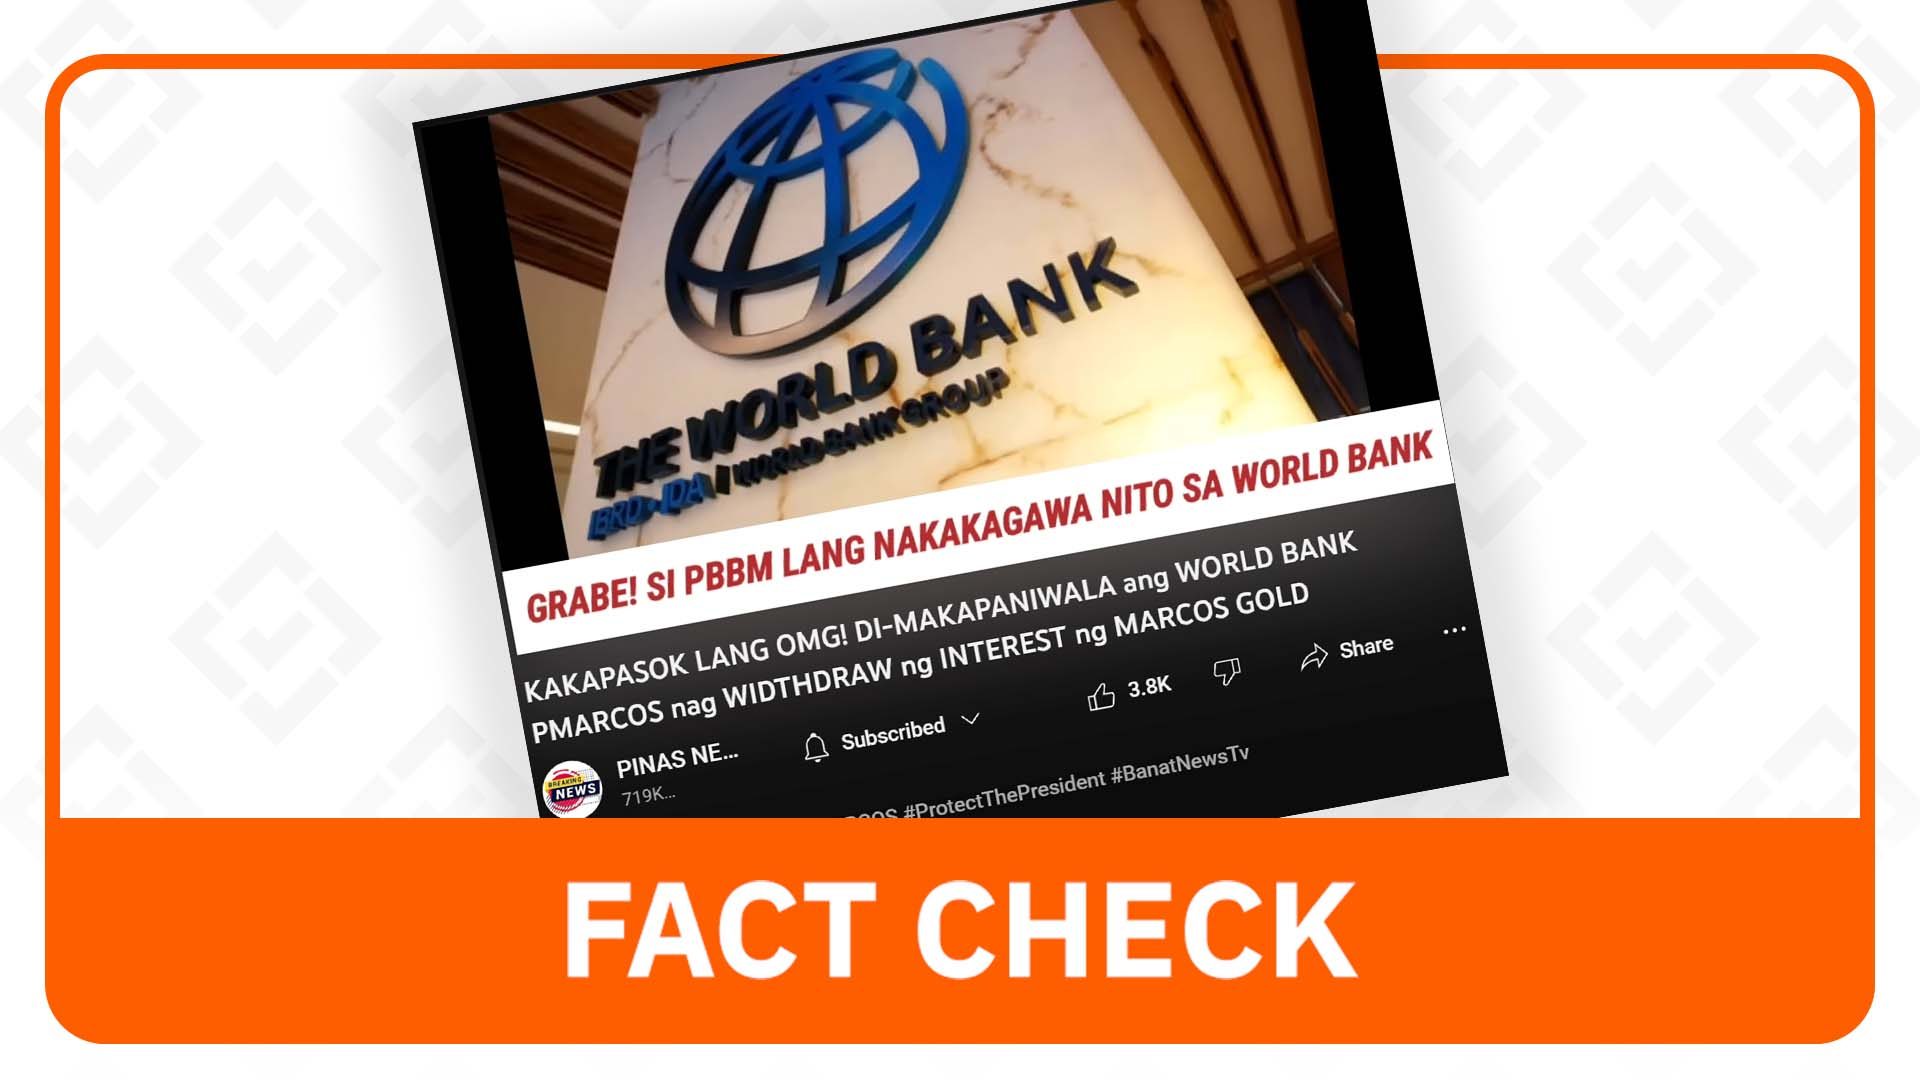 FACT CHECK: Marcos did not withdraw interest from gold deposits in the World Bank